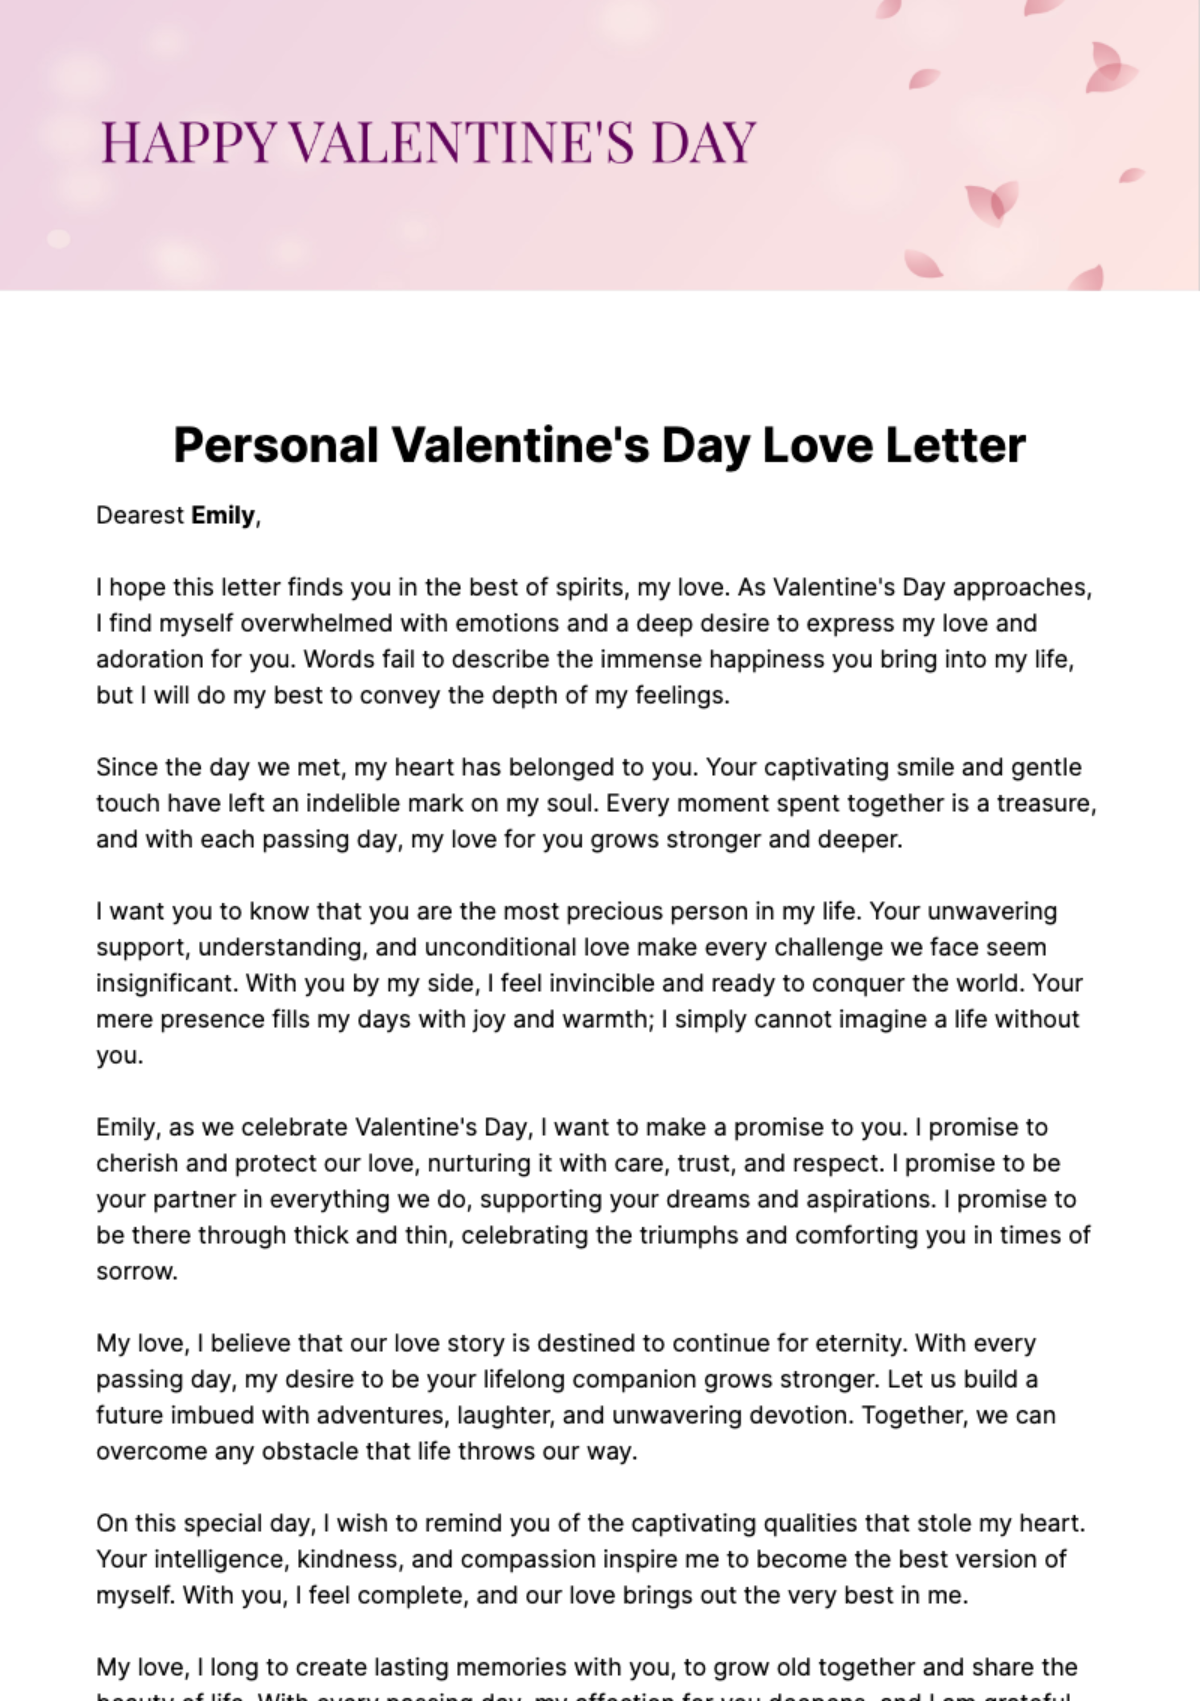 Free Personal Valentine's Day Love Letter Template